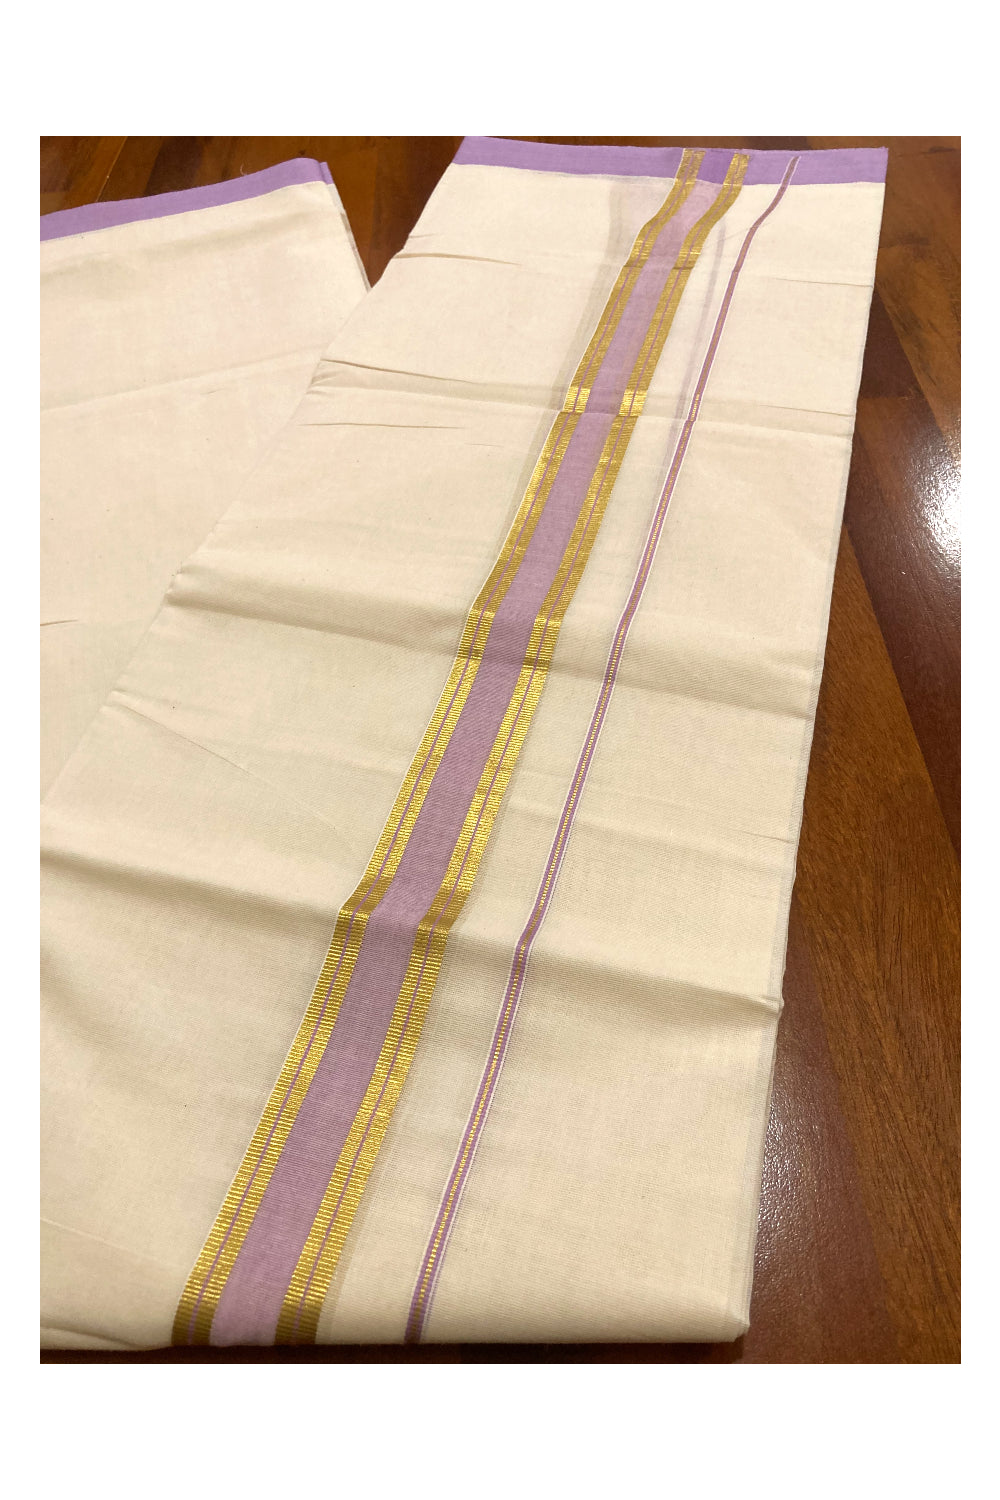 Pure Cotton Off White Double Mundu with Violet and Kasavu Border (South Indian Dhoti)